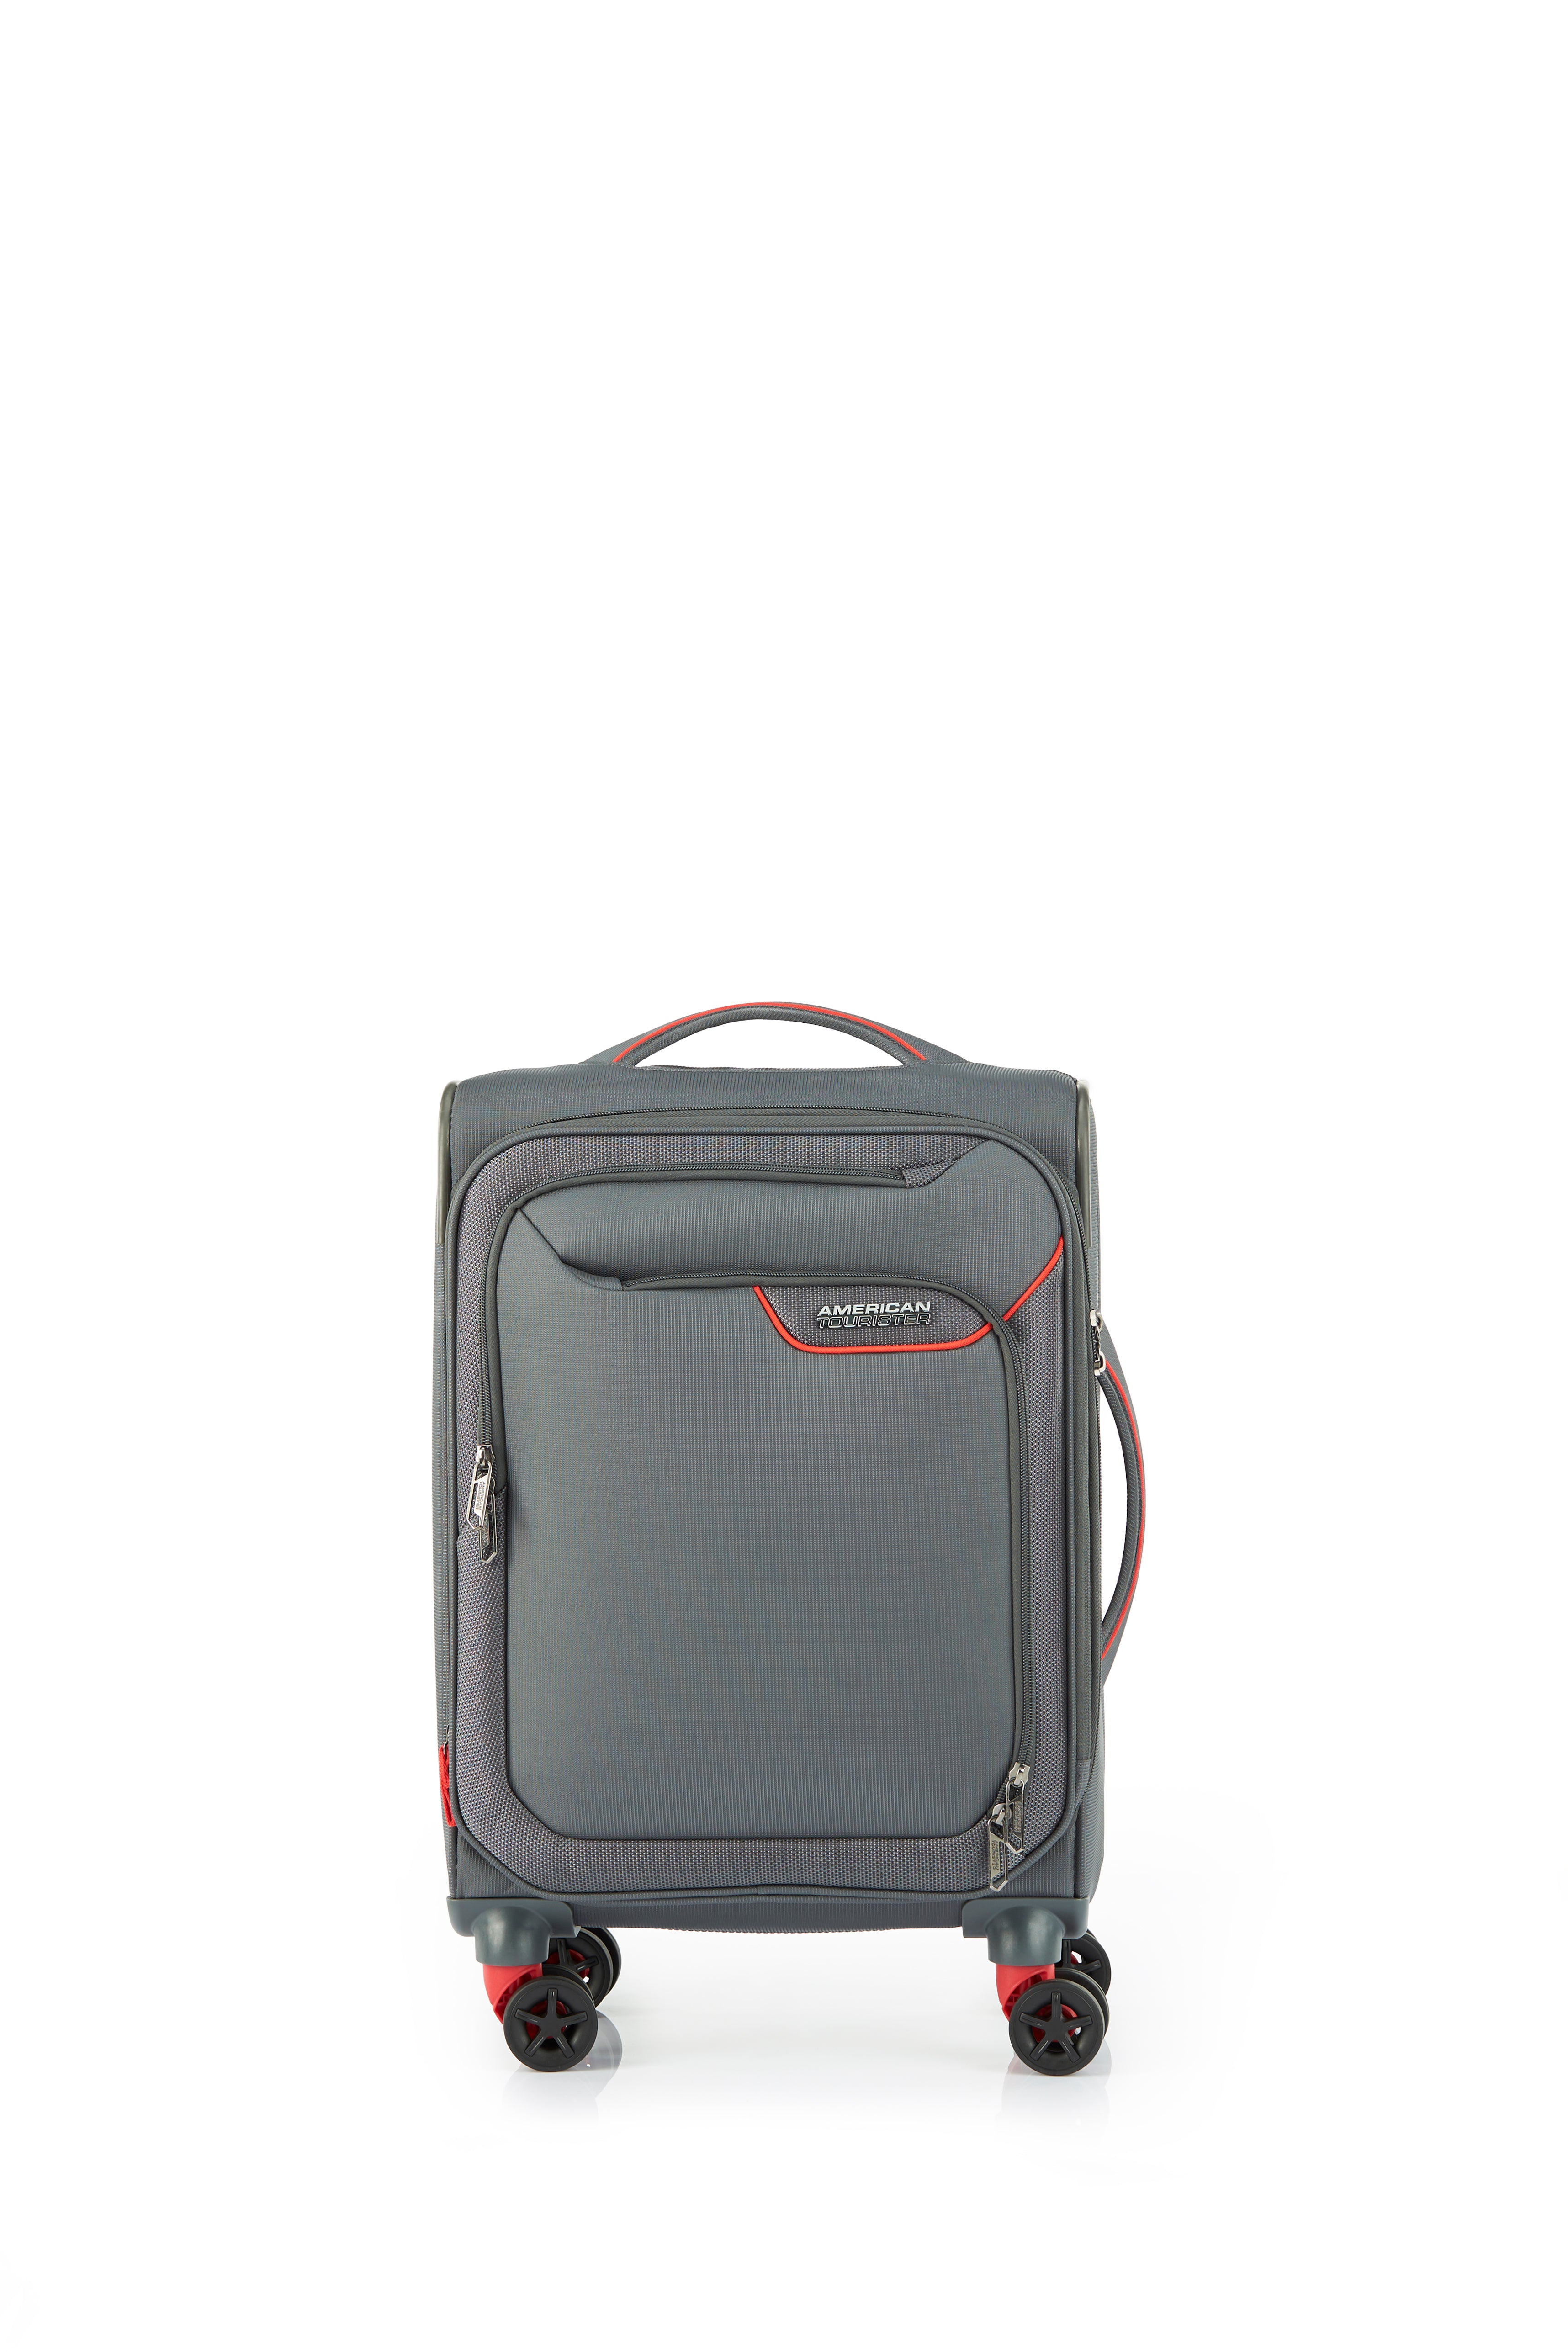 American Tourister - Applite ECO 55cm Small Suitcase - Grey/Red - 0